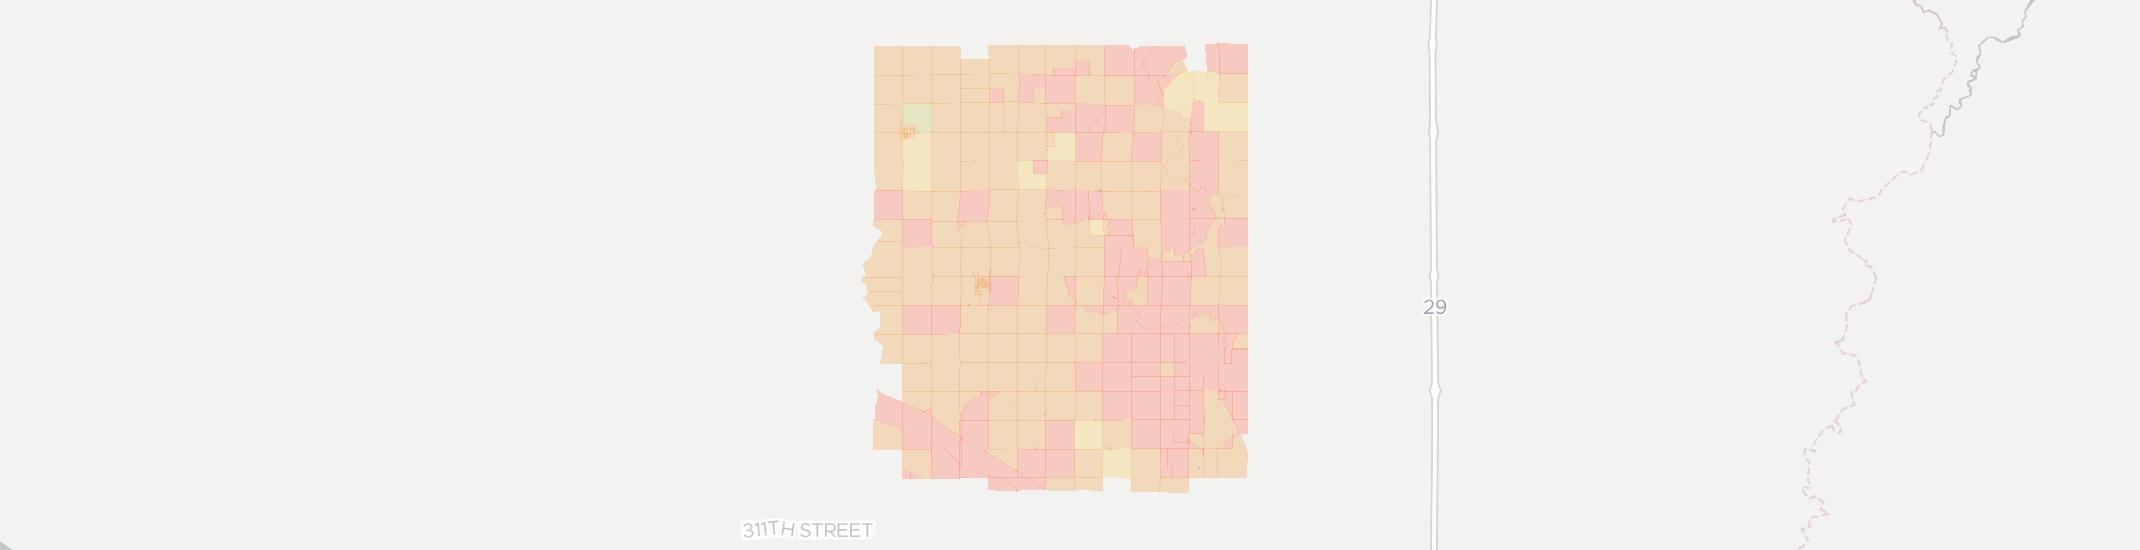 Wakonda Internet Competition Map. Click for interactive map